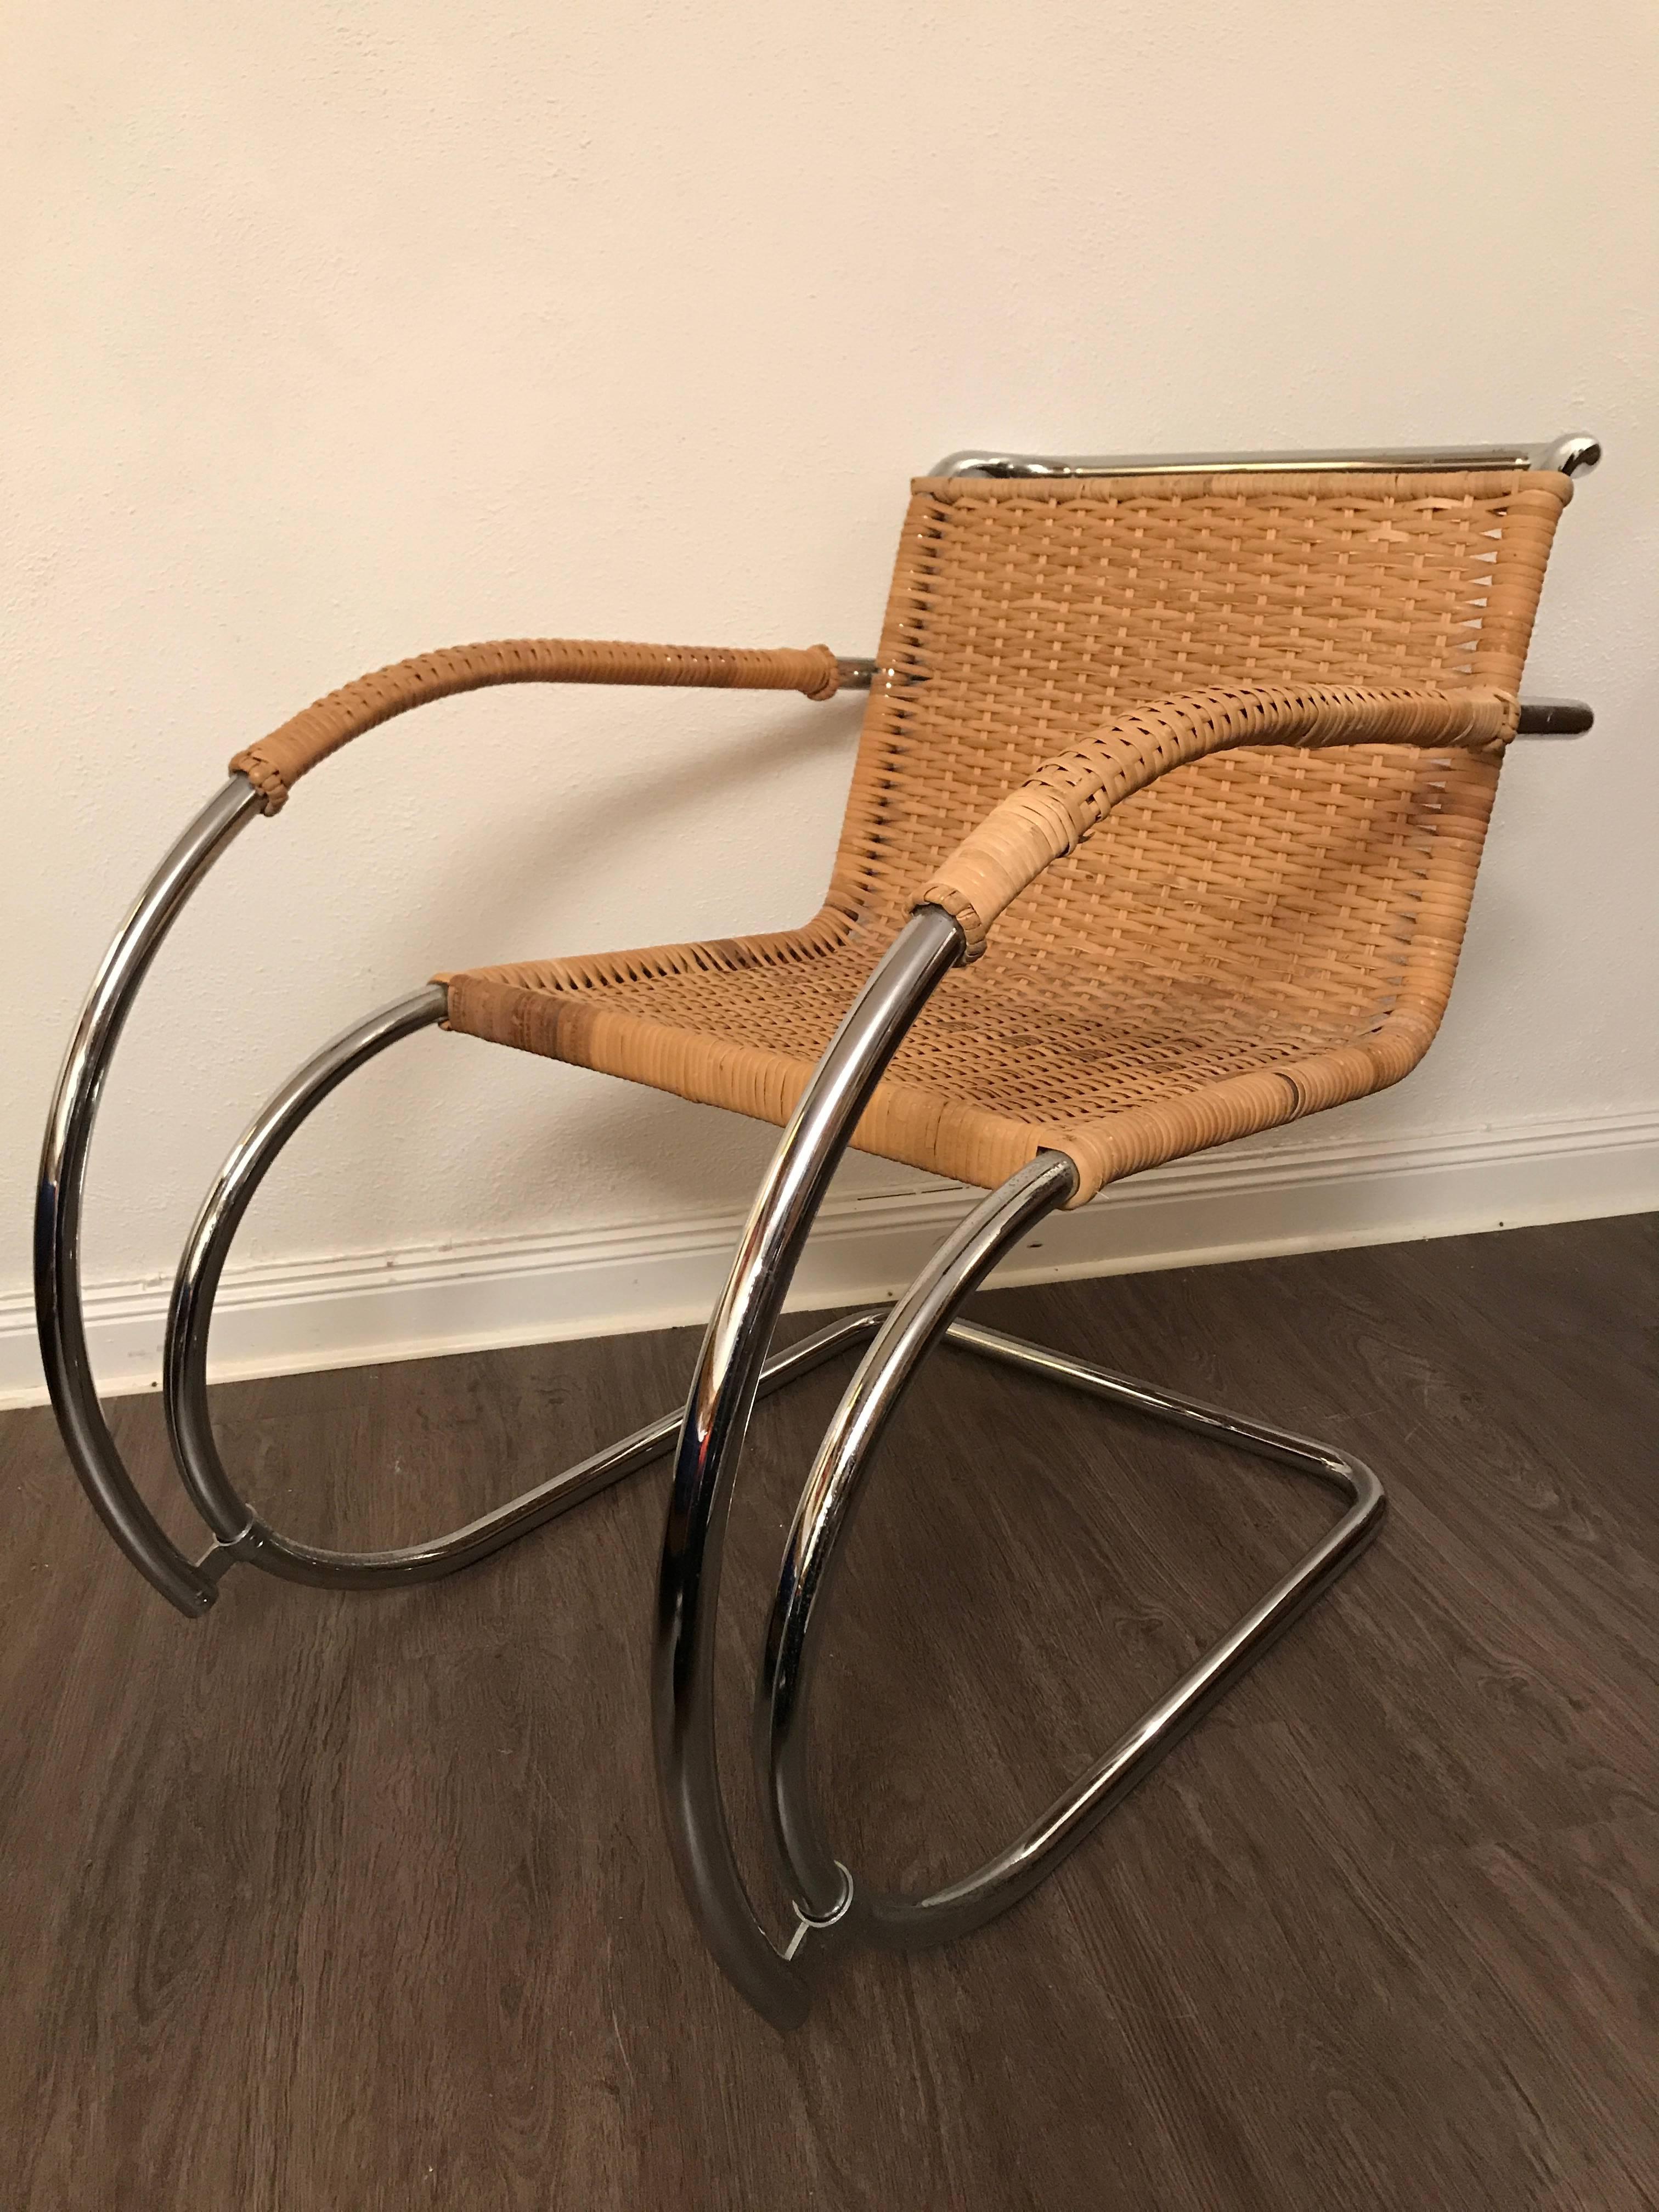 Pair of Mid-20th Century Ludwig Mies van der Rohe MR20 Rattan Chrome Armchairs 3